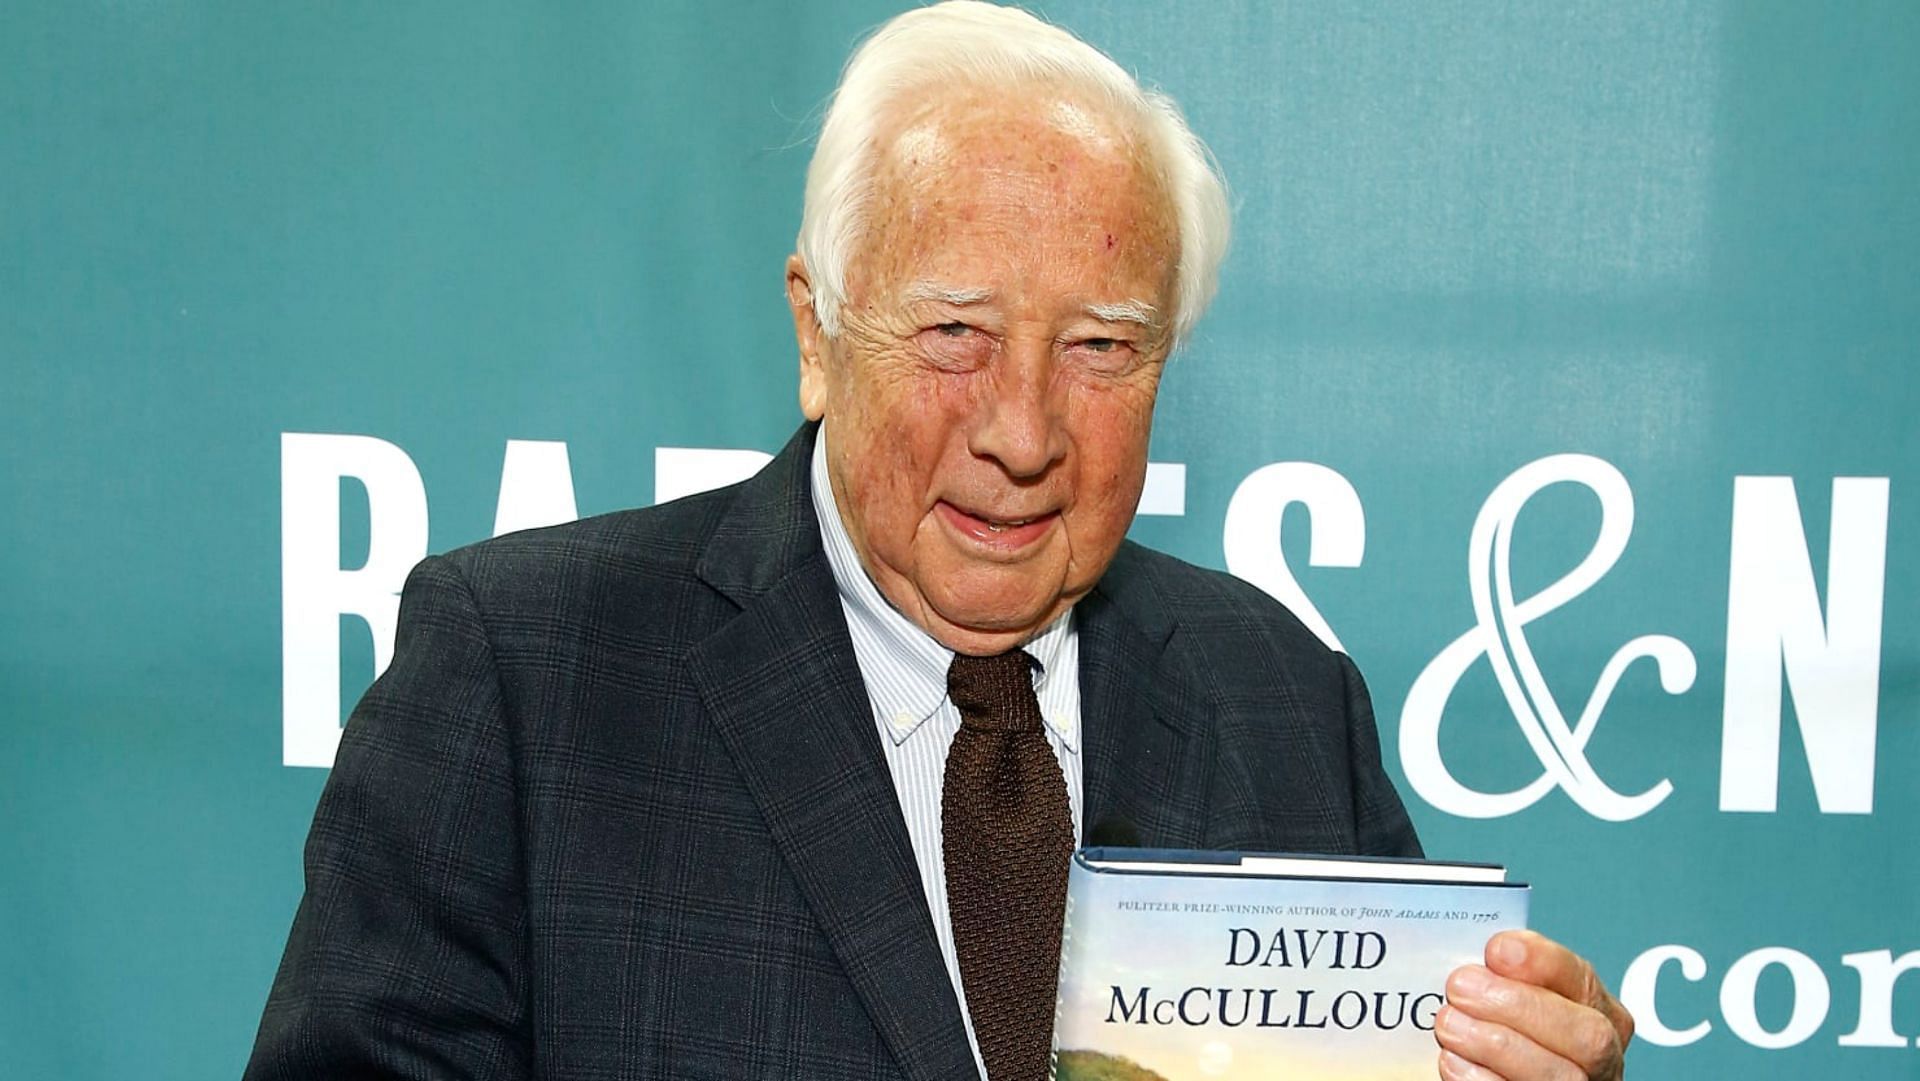 David McCullough received two Pulitzer Awards - one  for Truman, and another for John Adams. (Image via John Lamparski/Getty)